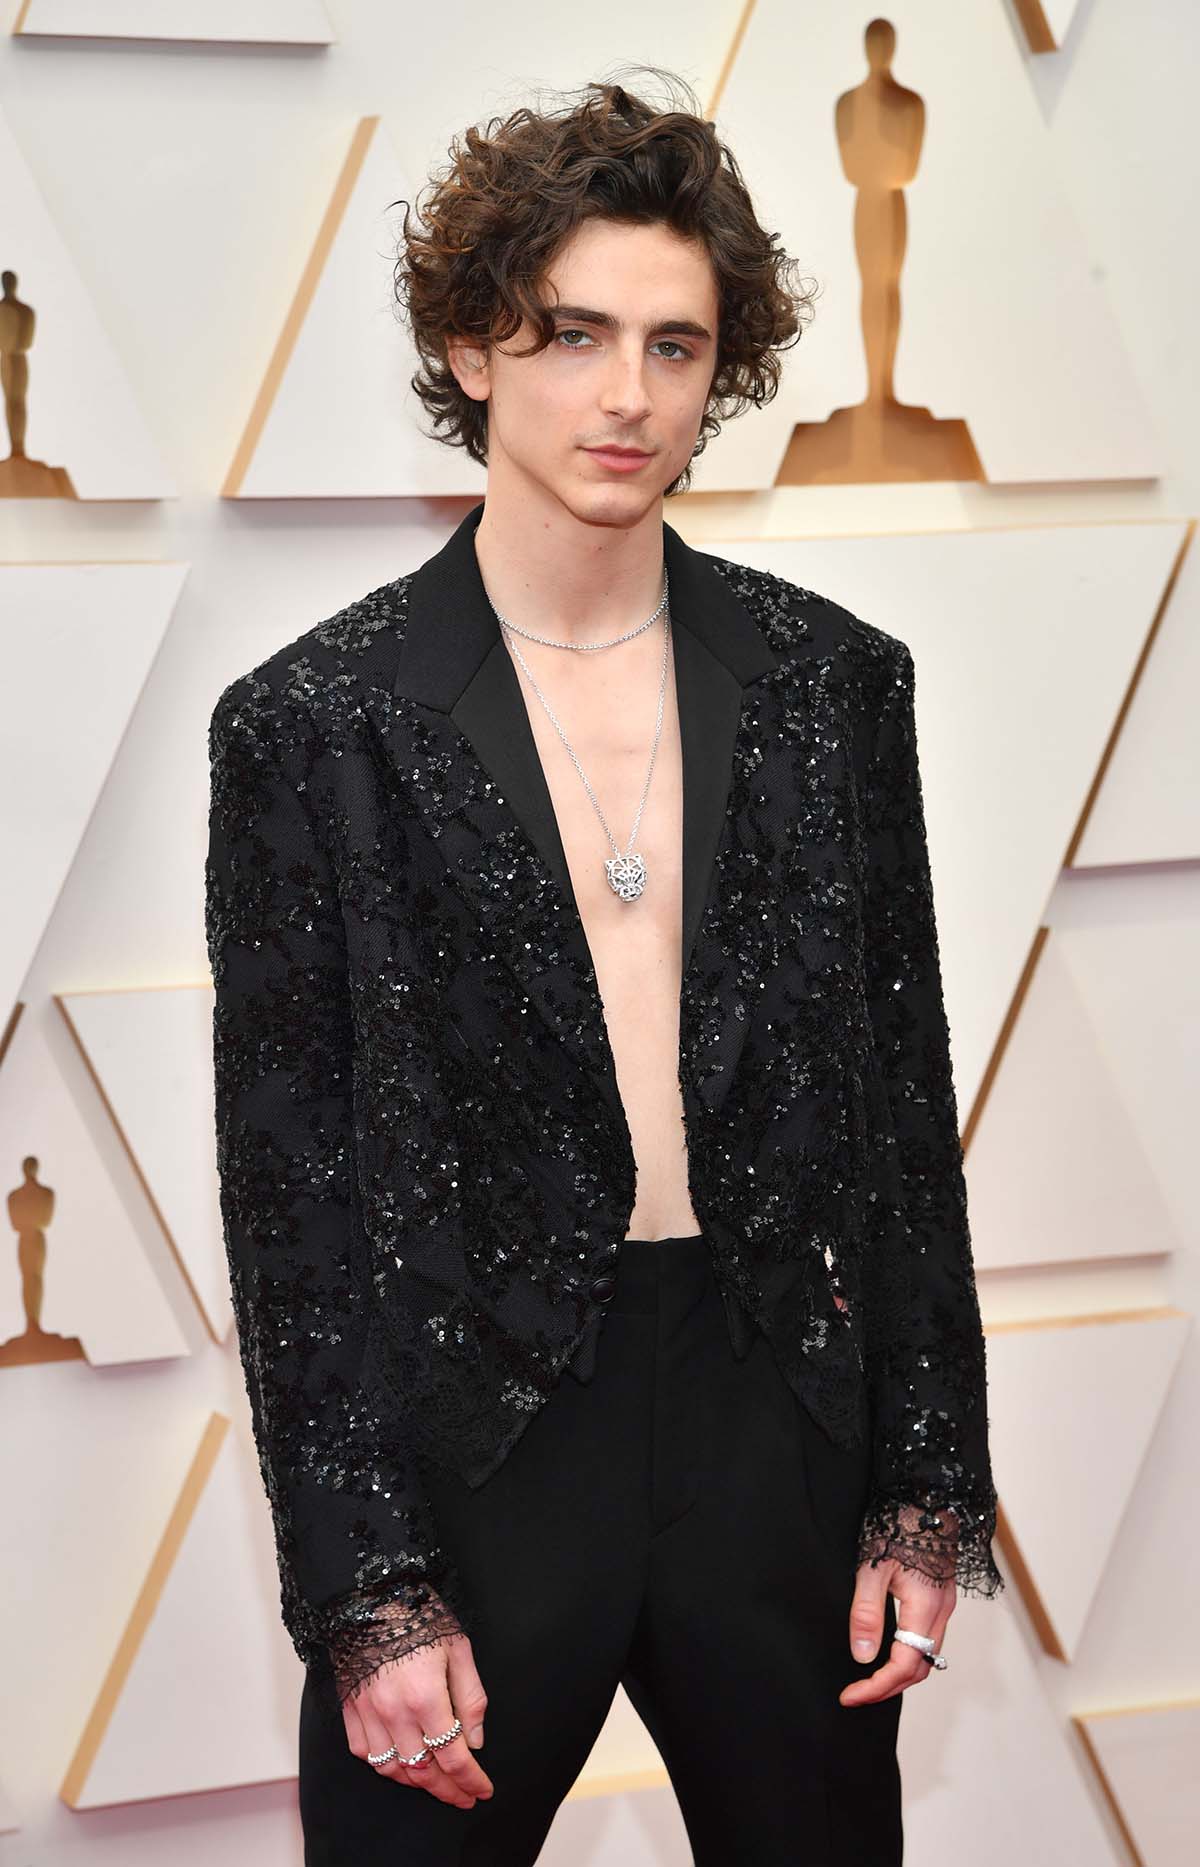 People are obsessed with Timothée Chalamet's shirtless Oscars look